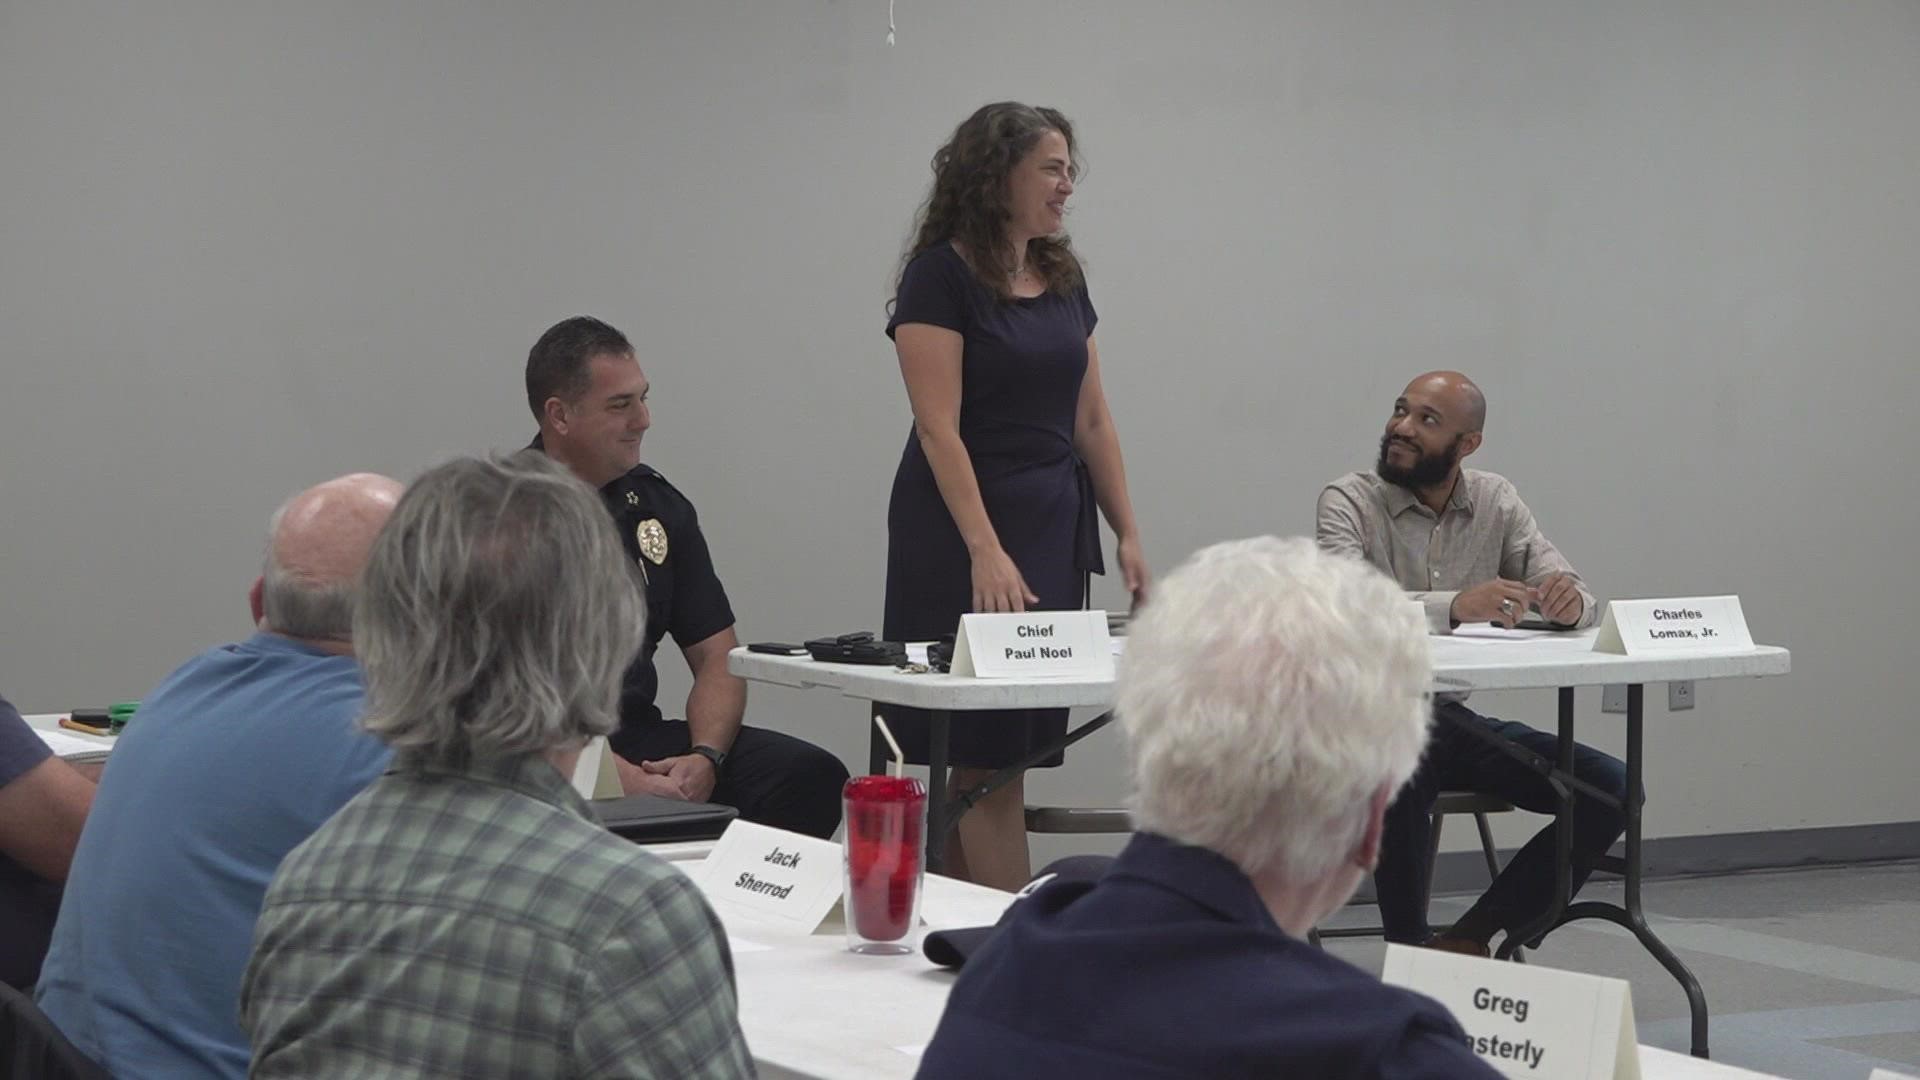 The Neighborhood Advisory Council meets every month. On Wednesday, members mostly asked about how KPD plans to address overdoses in the community.